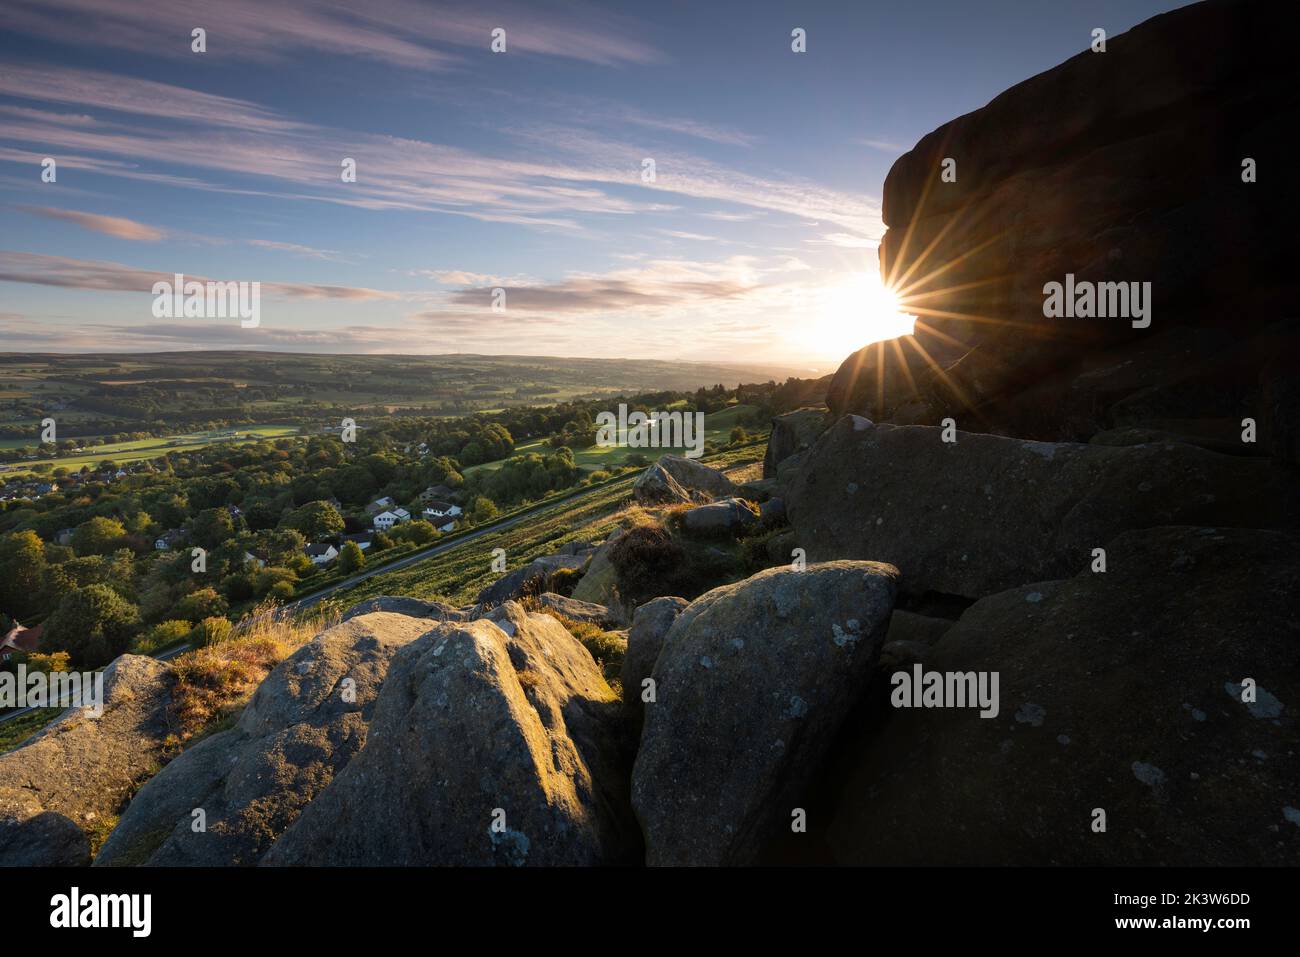 Sunrise on the famous Cow and Calf rocks, Ilkley moor, with the West Yorkshire town of Ilkley and Wharfedale in the distance. Stock Photo